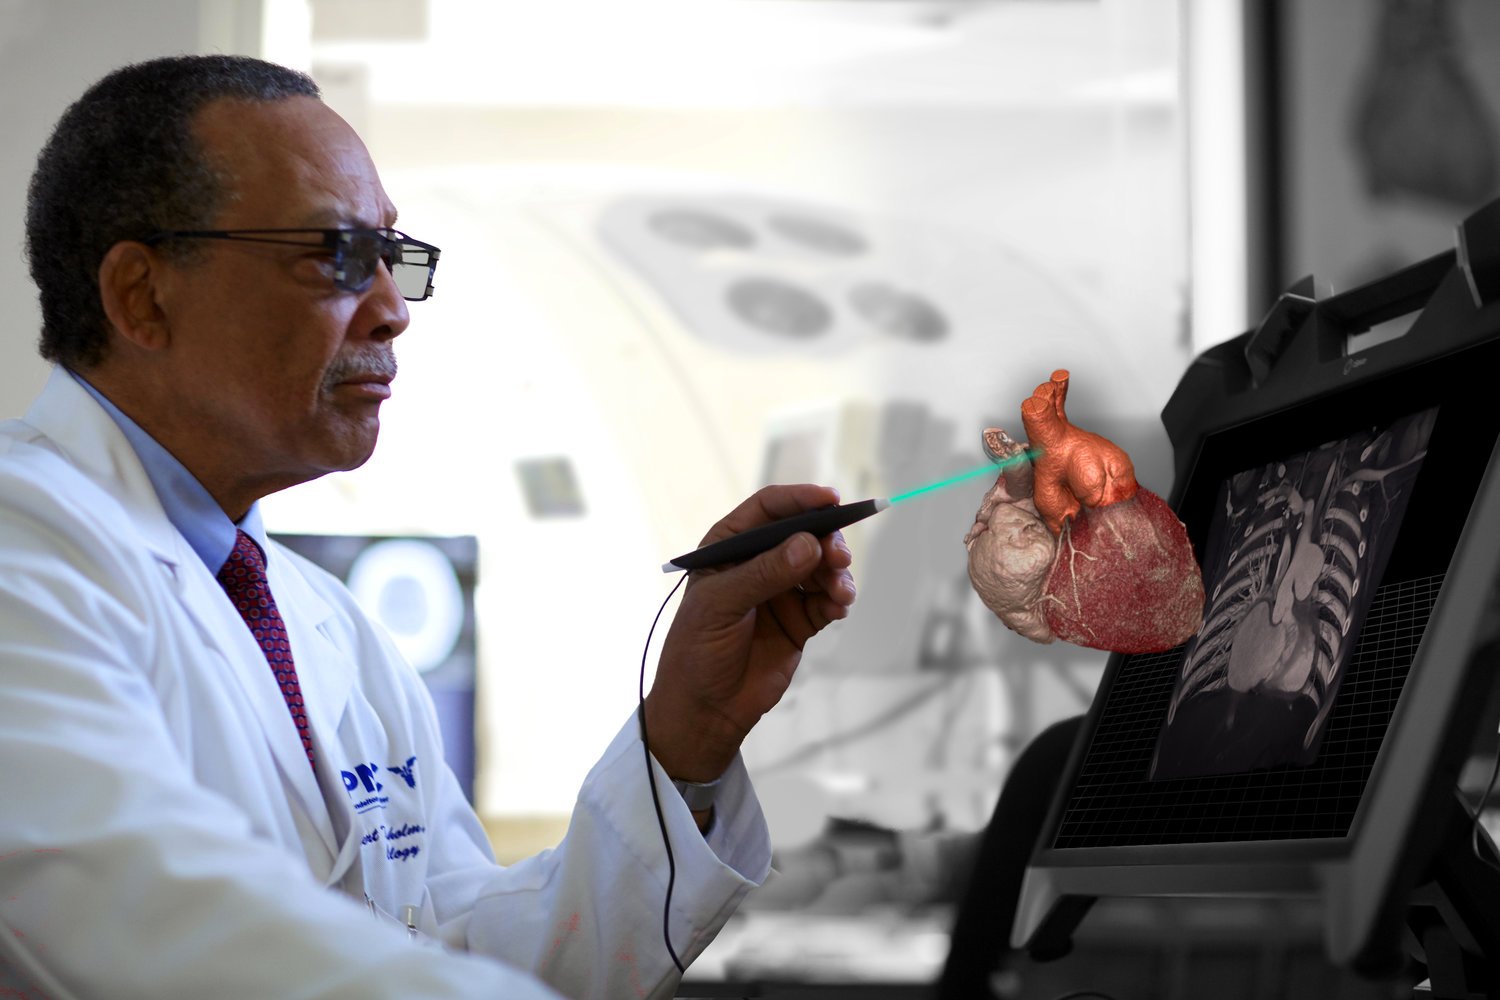 EchoPixel allows radiologists to see CT, MRI and ultrasound scans in 3-D